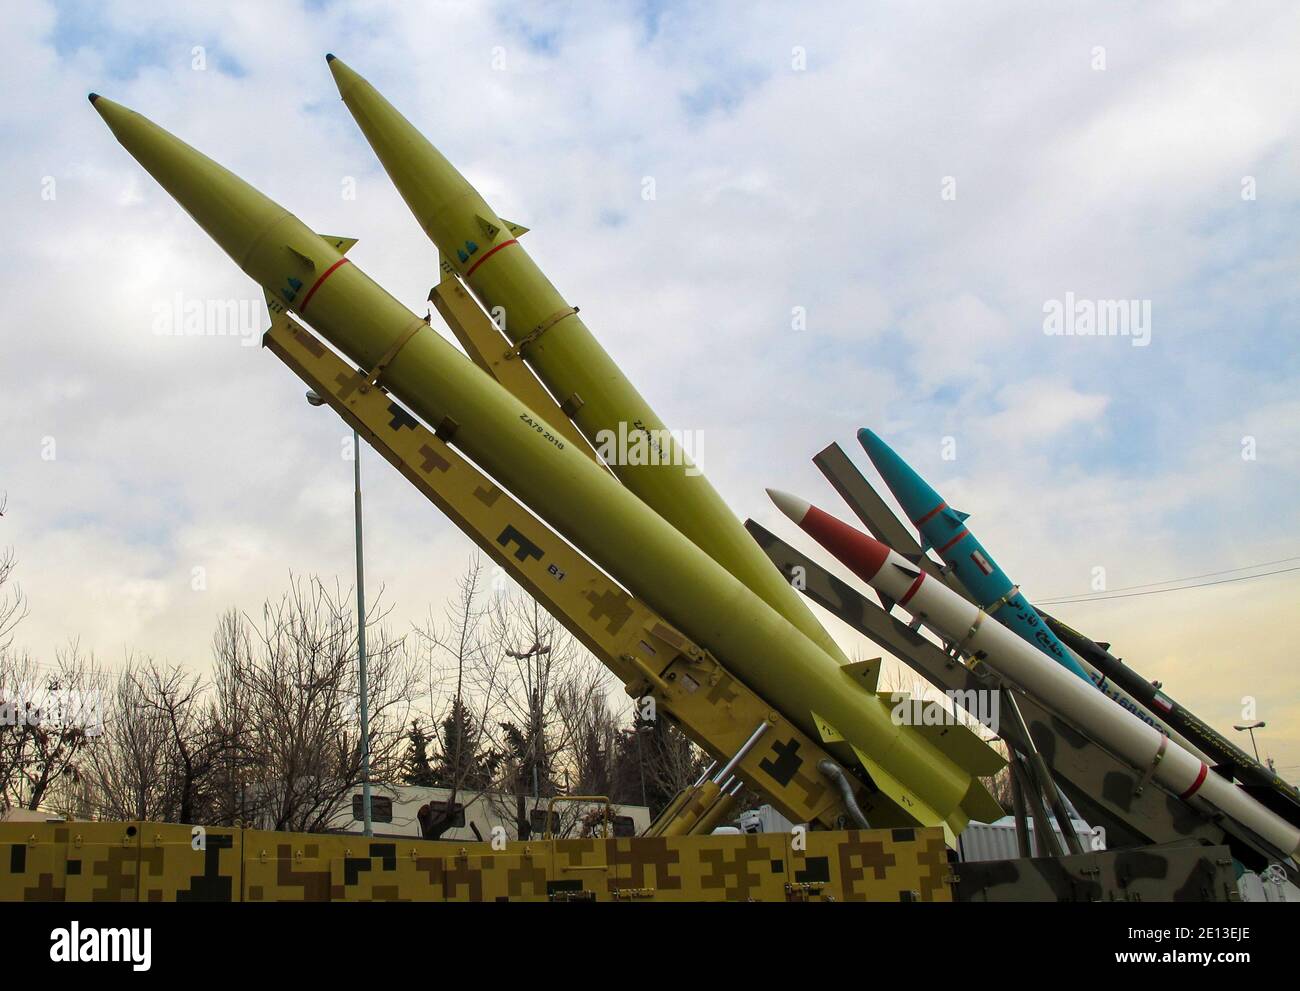 Iranian made short-range ballistic missiles displayed at the 'Authority 40' military exhibition in Tehran. Stock Photo